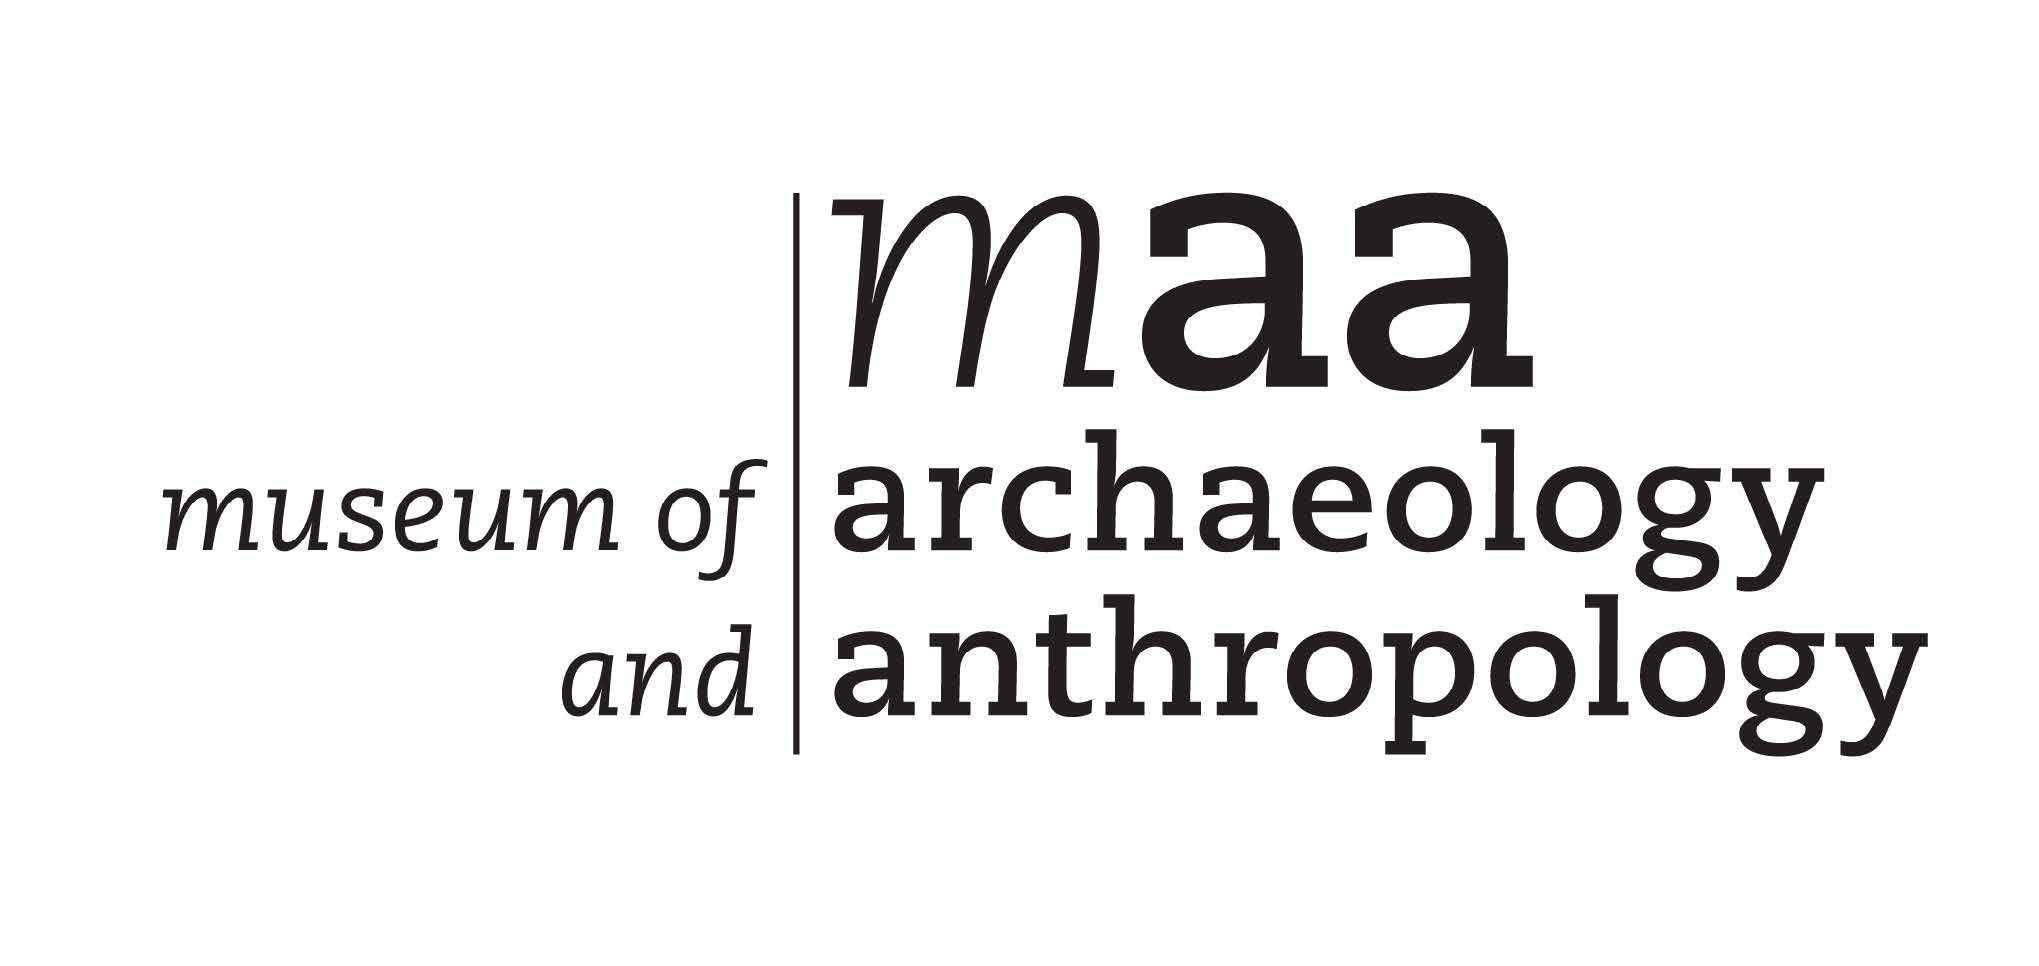 'MAA: Museum of archaeology and anthropology' set in a clear logo, with no images. The font is a black chunky serif, all in lower case.